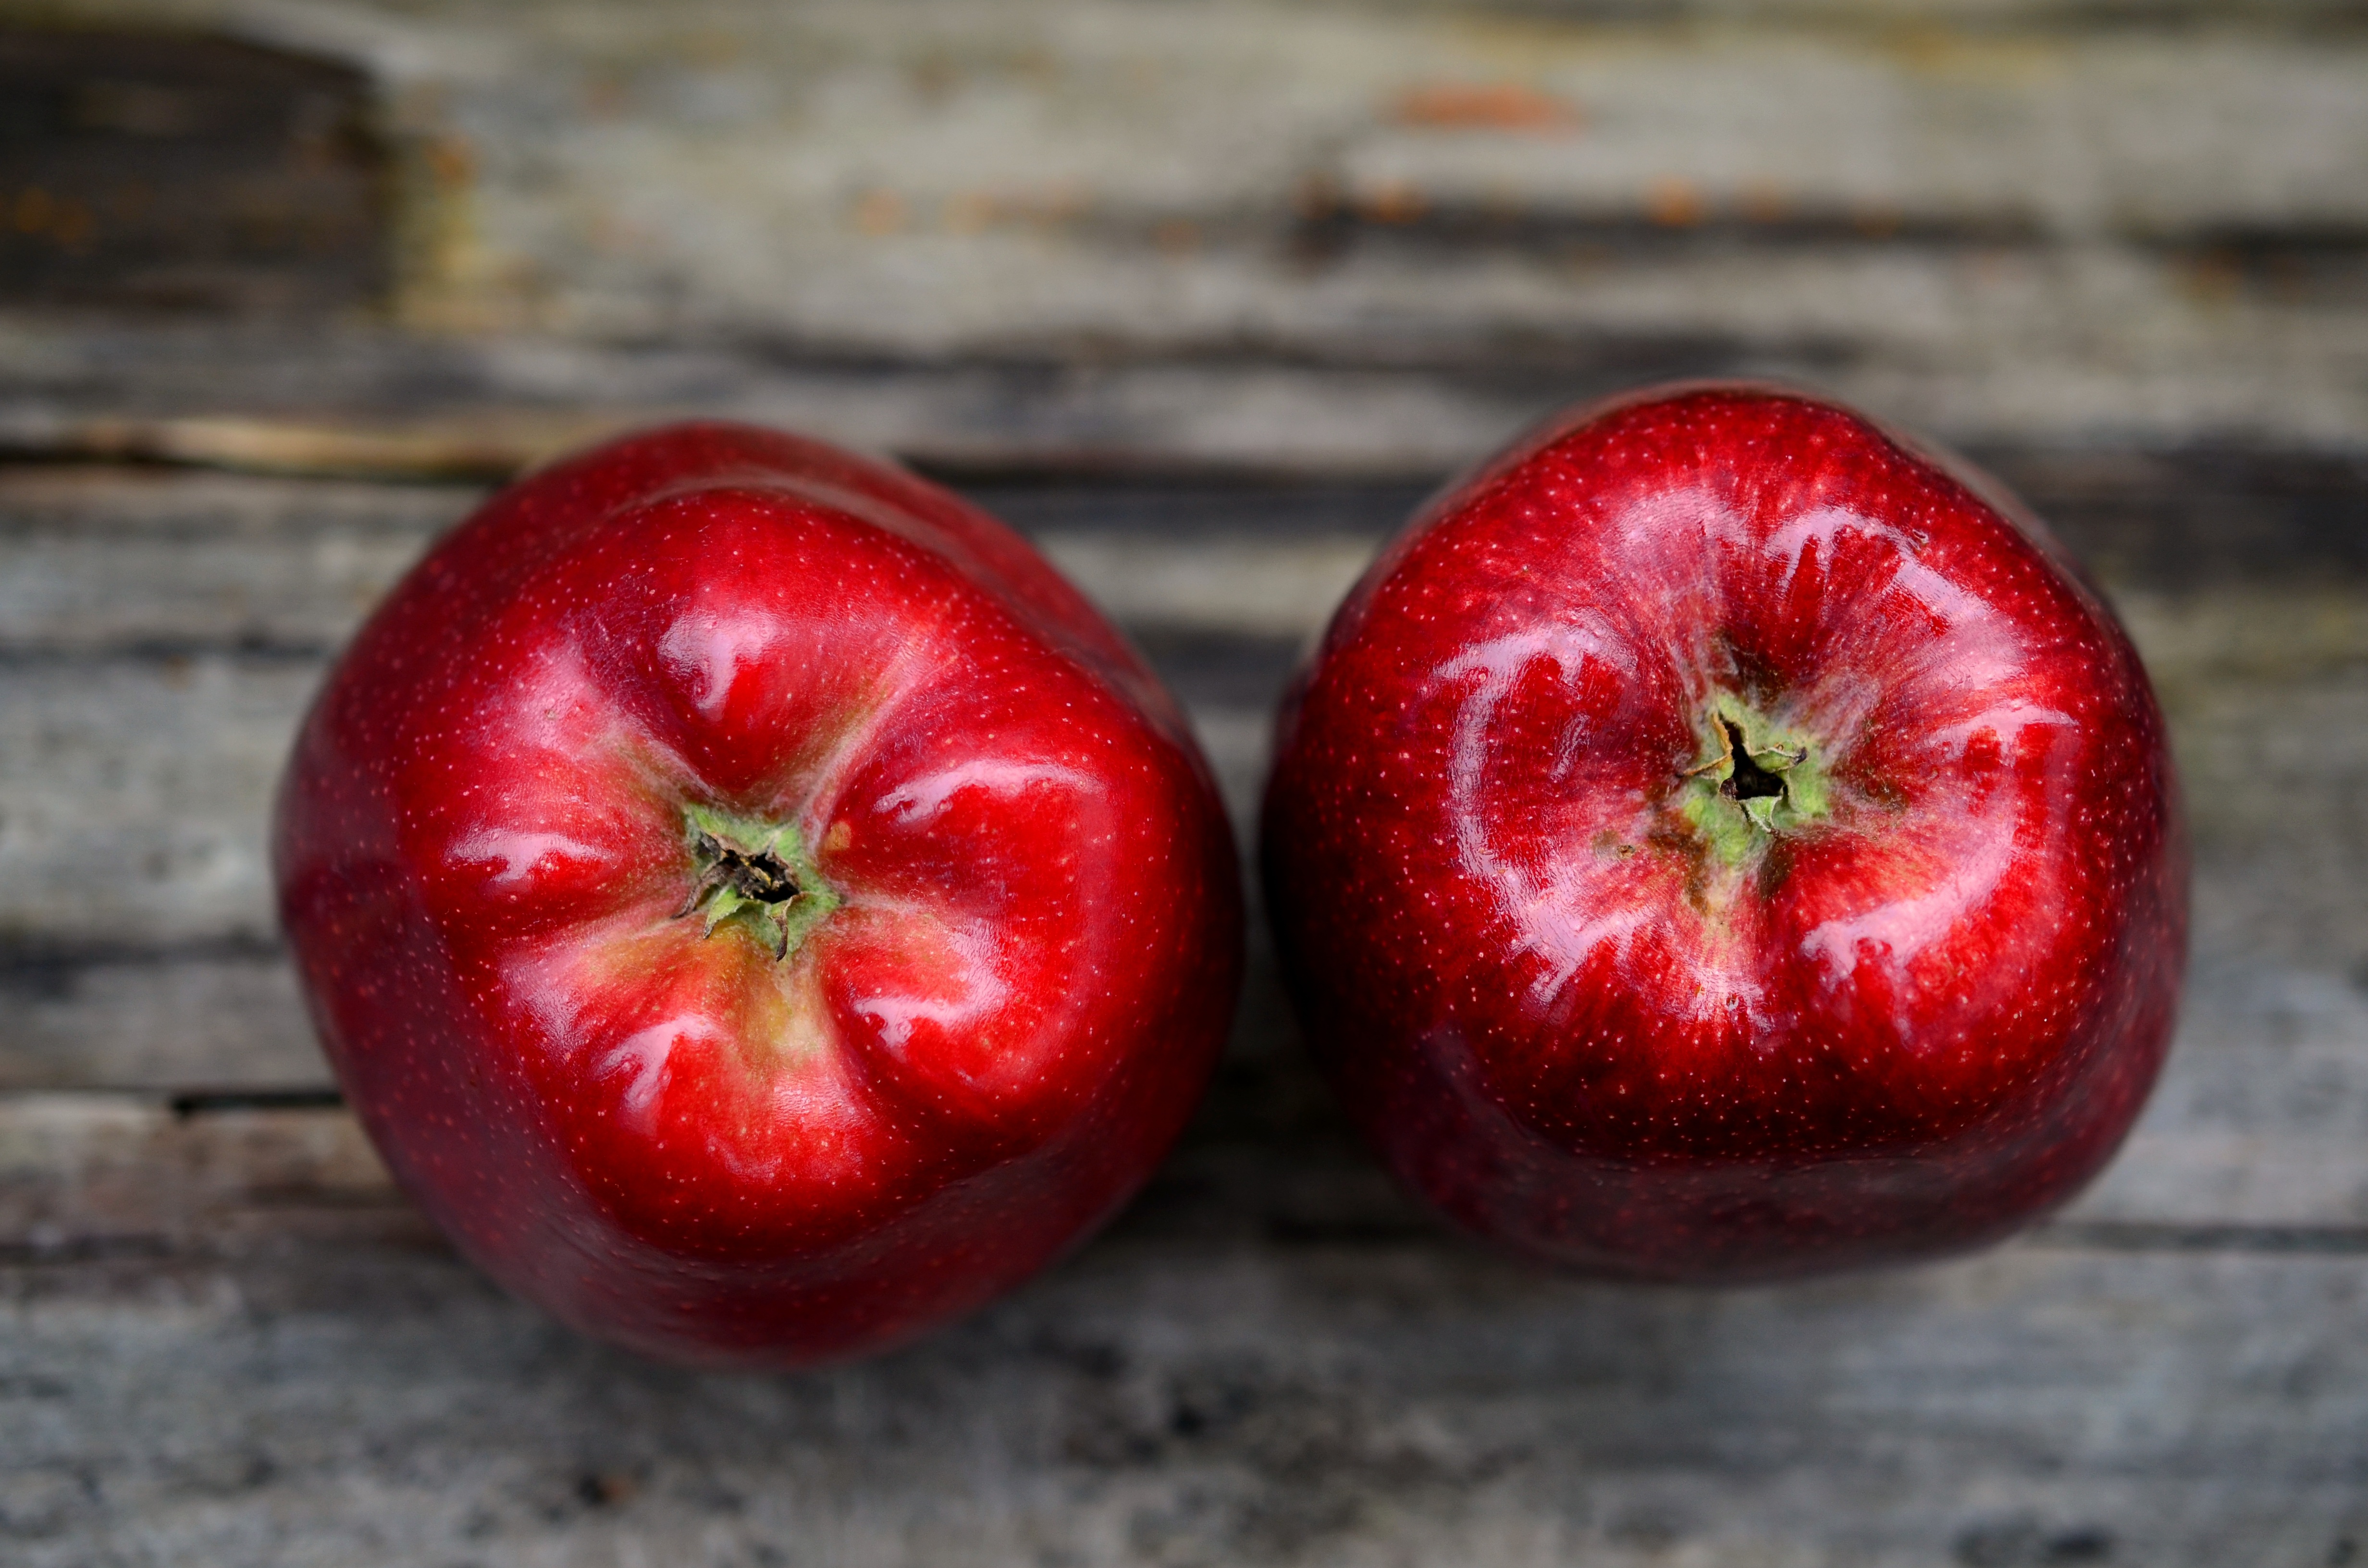 Fresh red apples photo